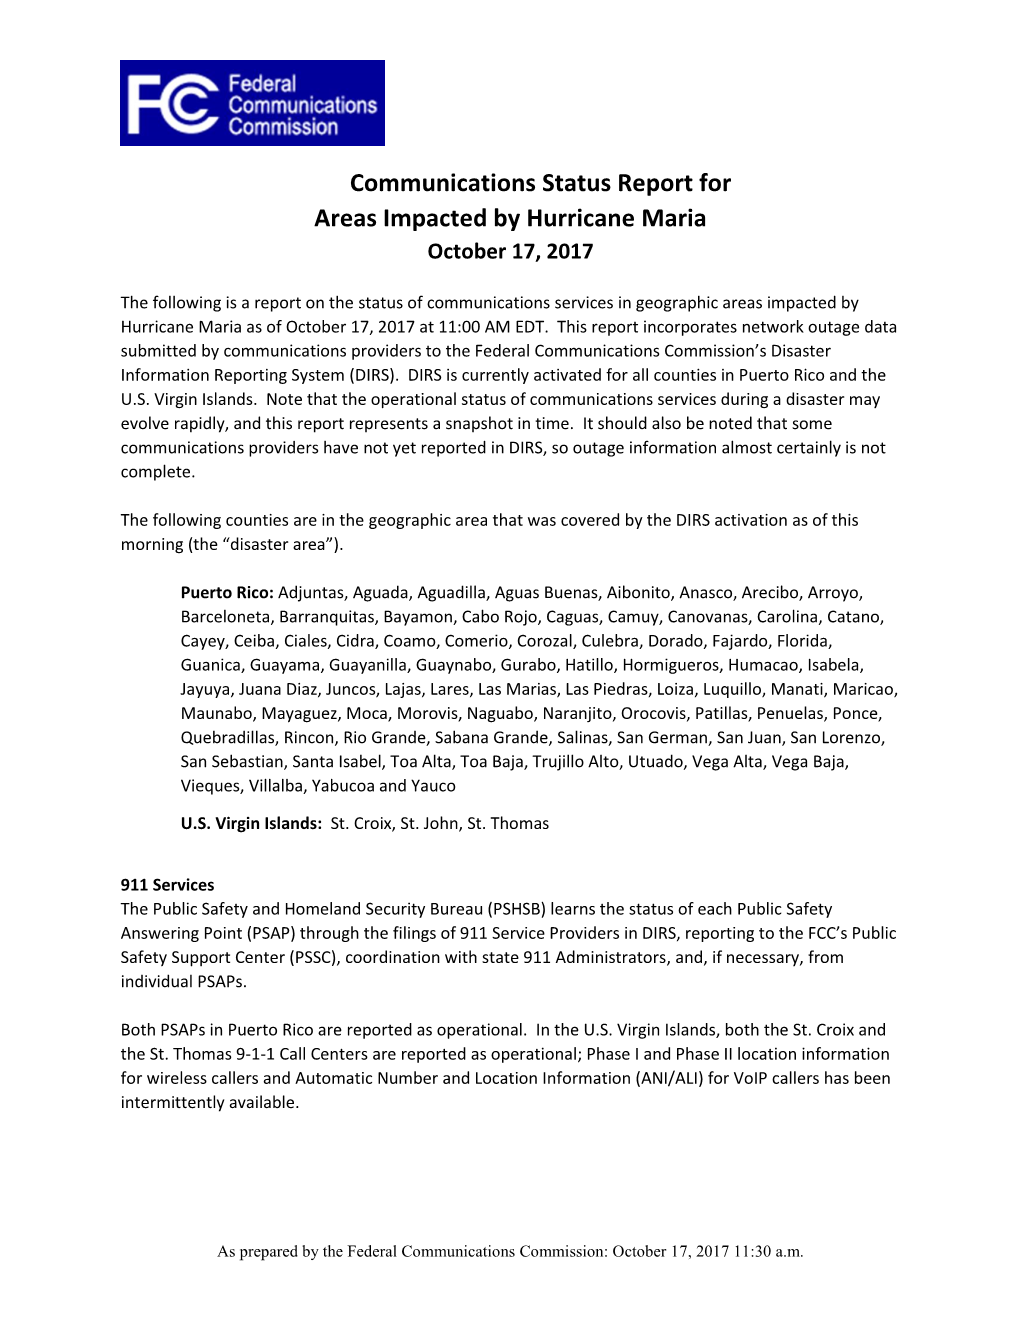 Communications Status Report for Areas Impacted by Hurricane Maria October 17, 2017